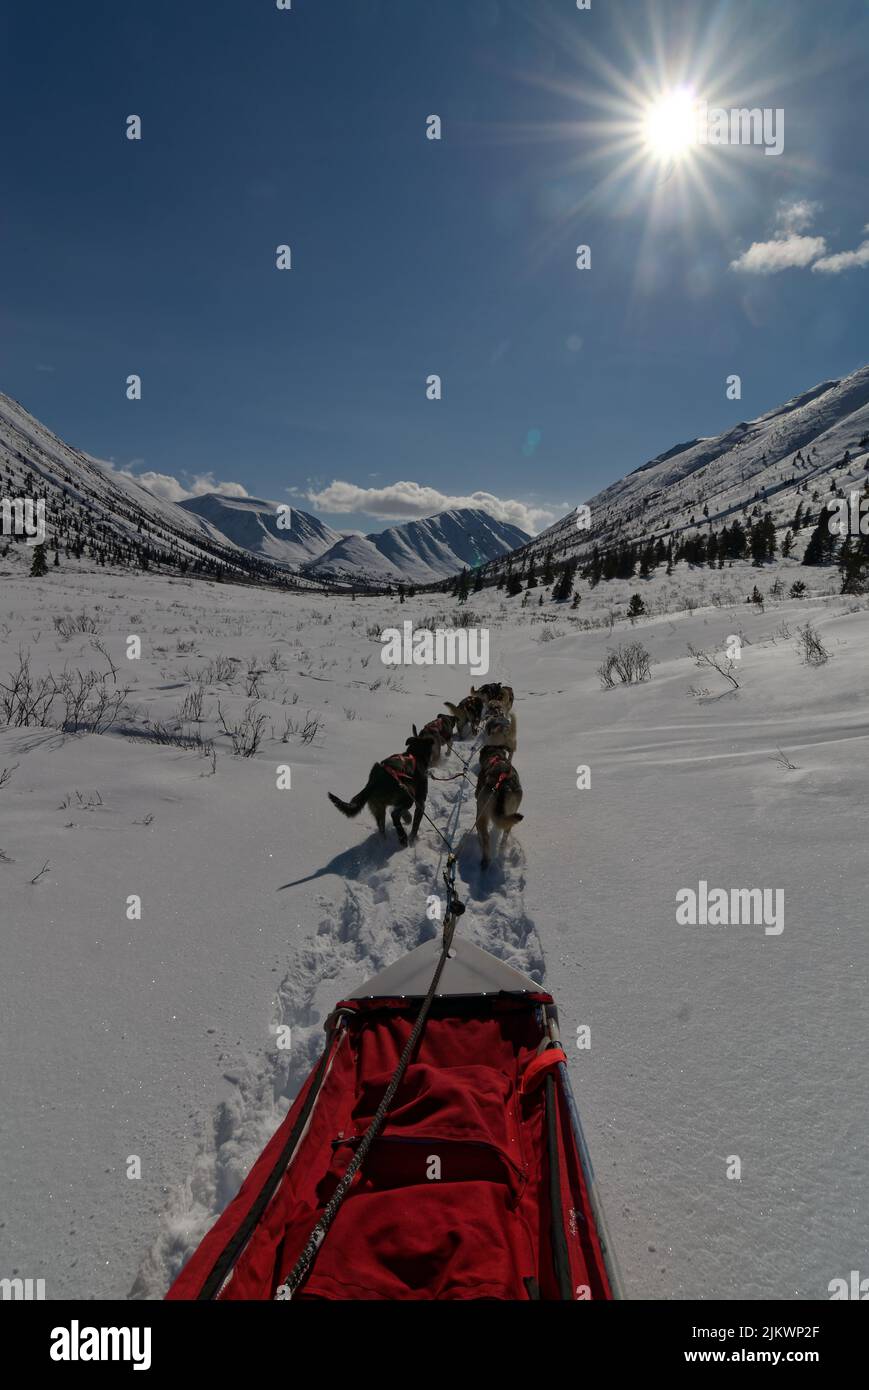 A team of sled dogs traveling through alpine valley snow into the sun Stock Photo